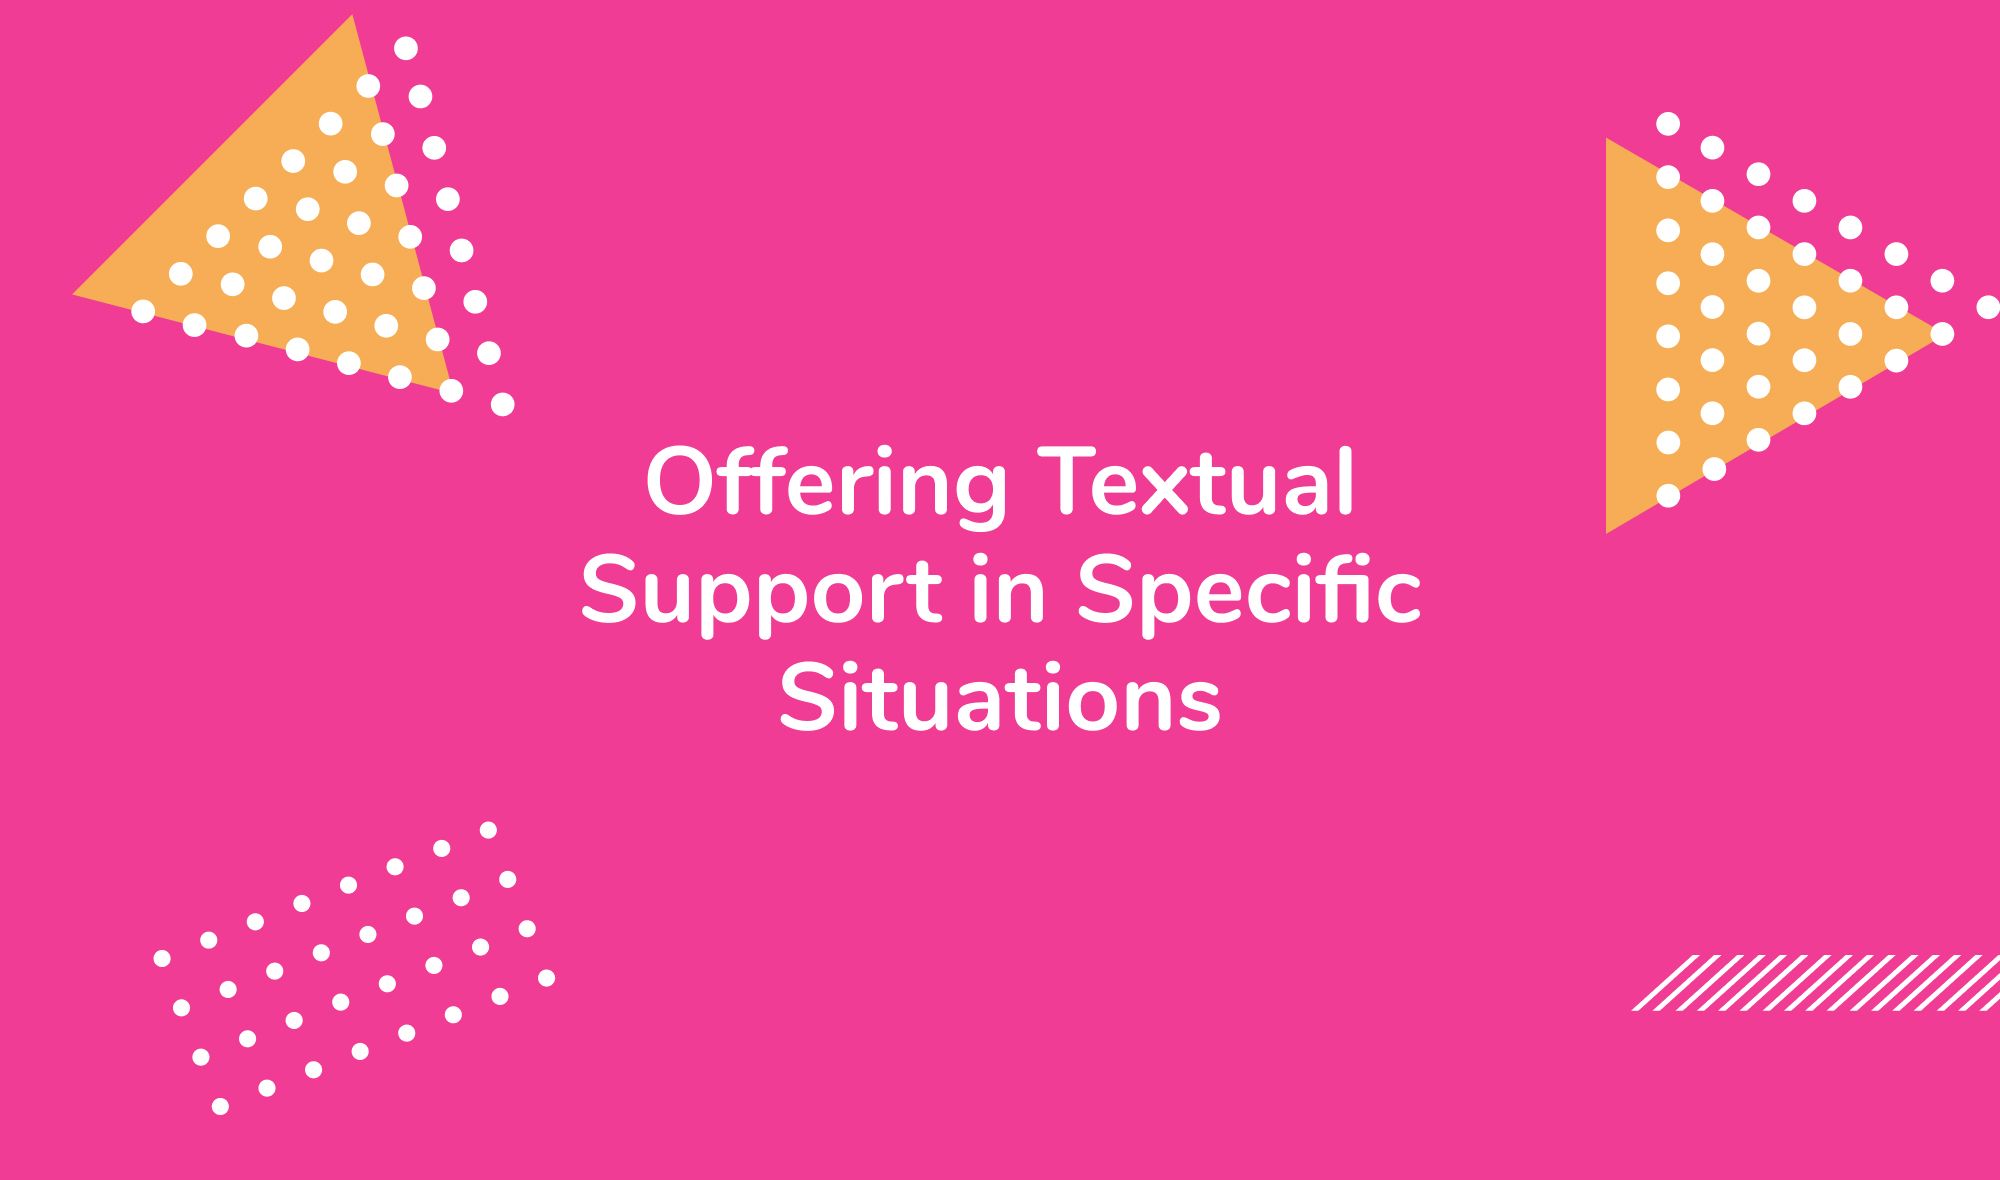 Offering Textual Support in Specific Situations